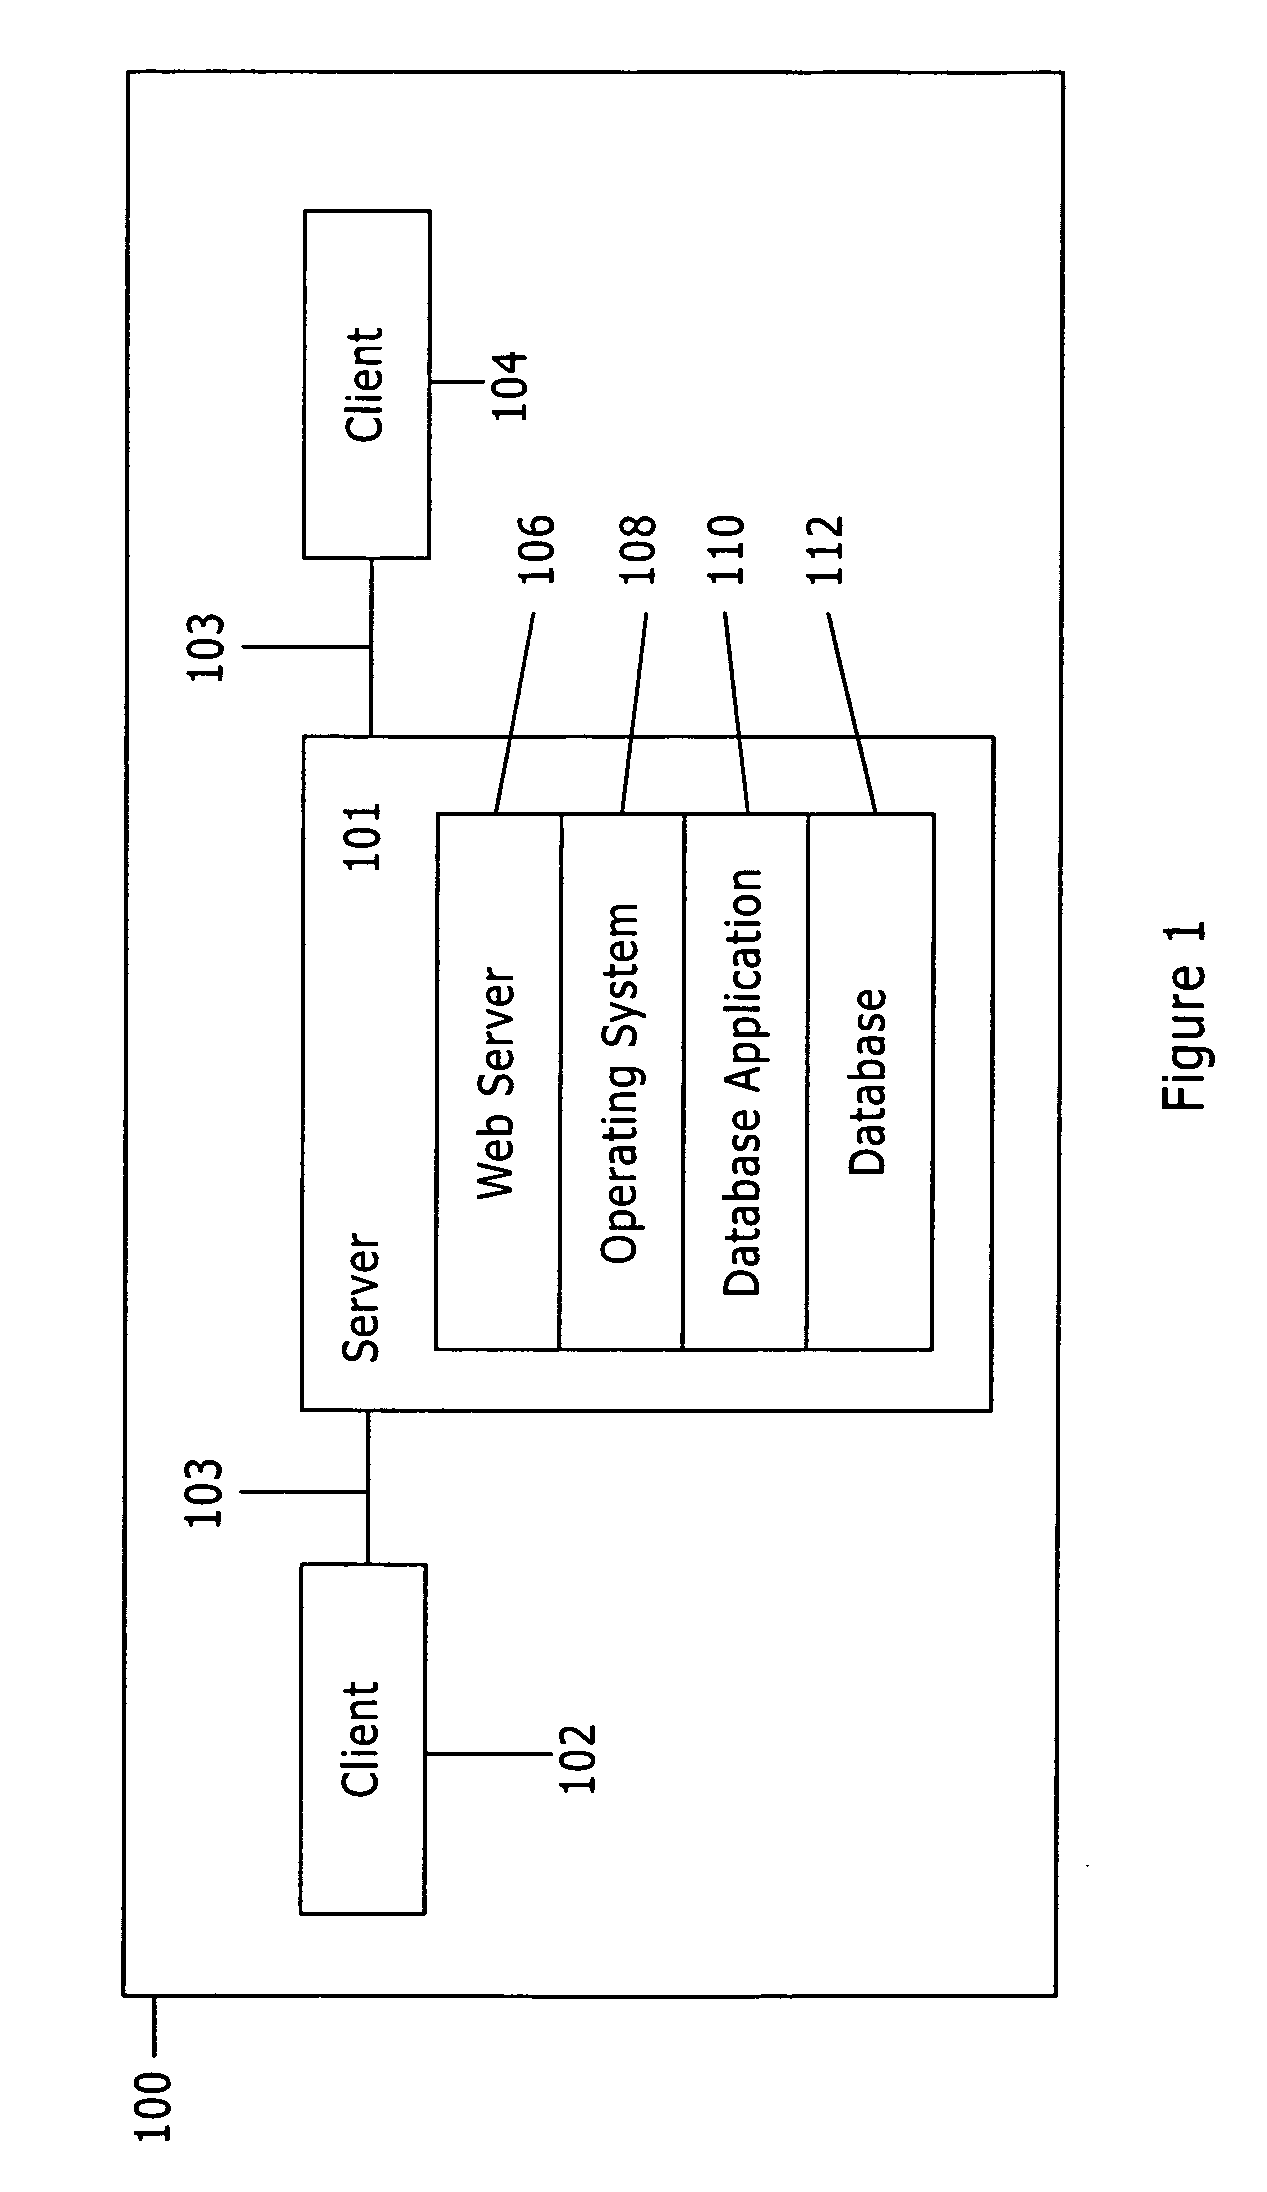 Dynamic generation of form pages for accessing a database